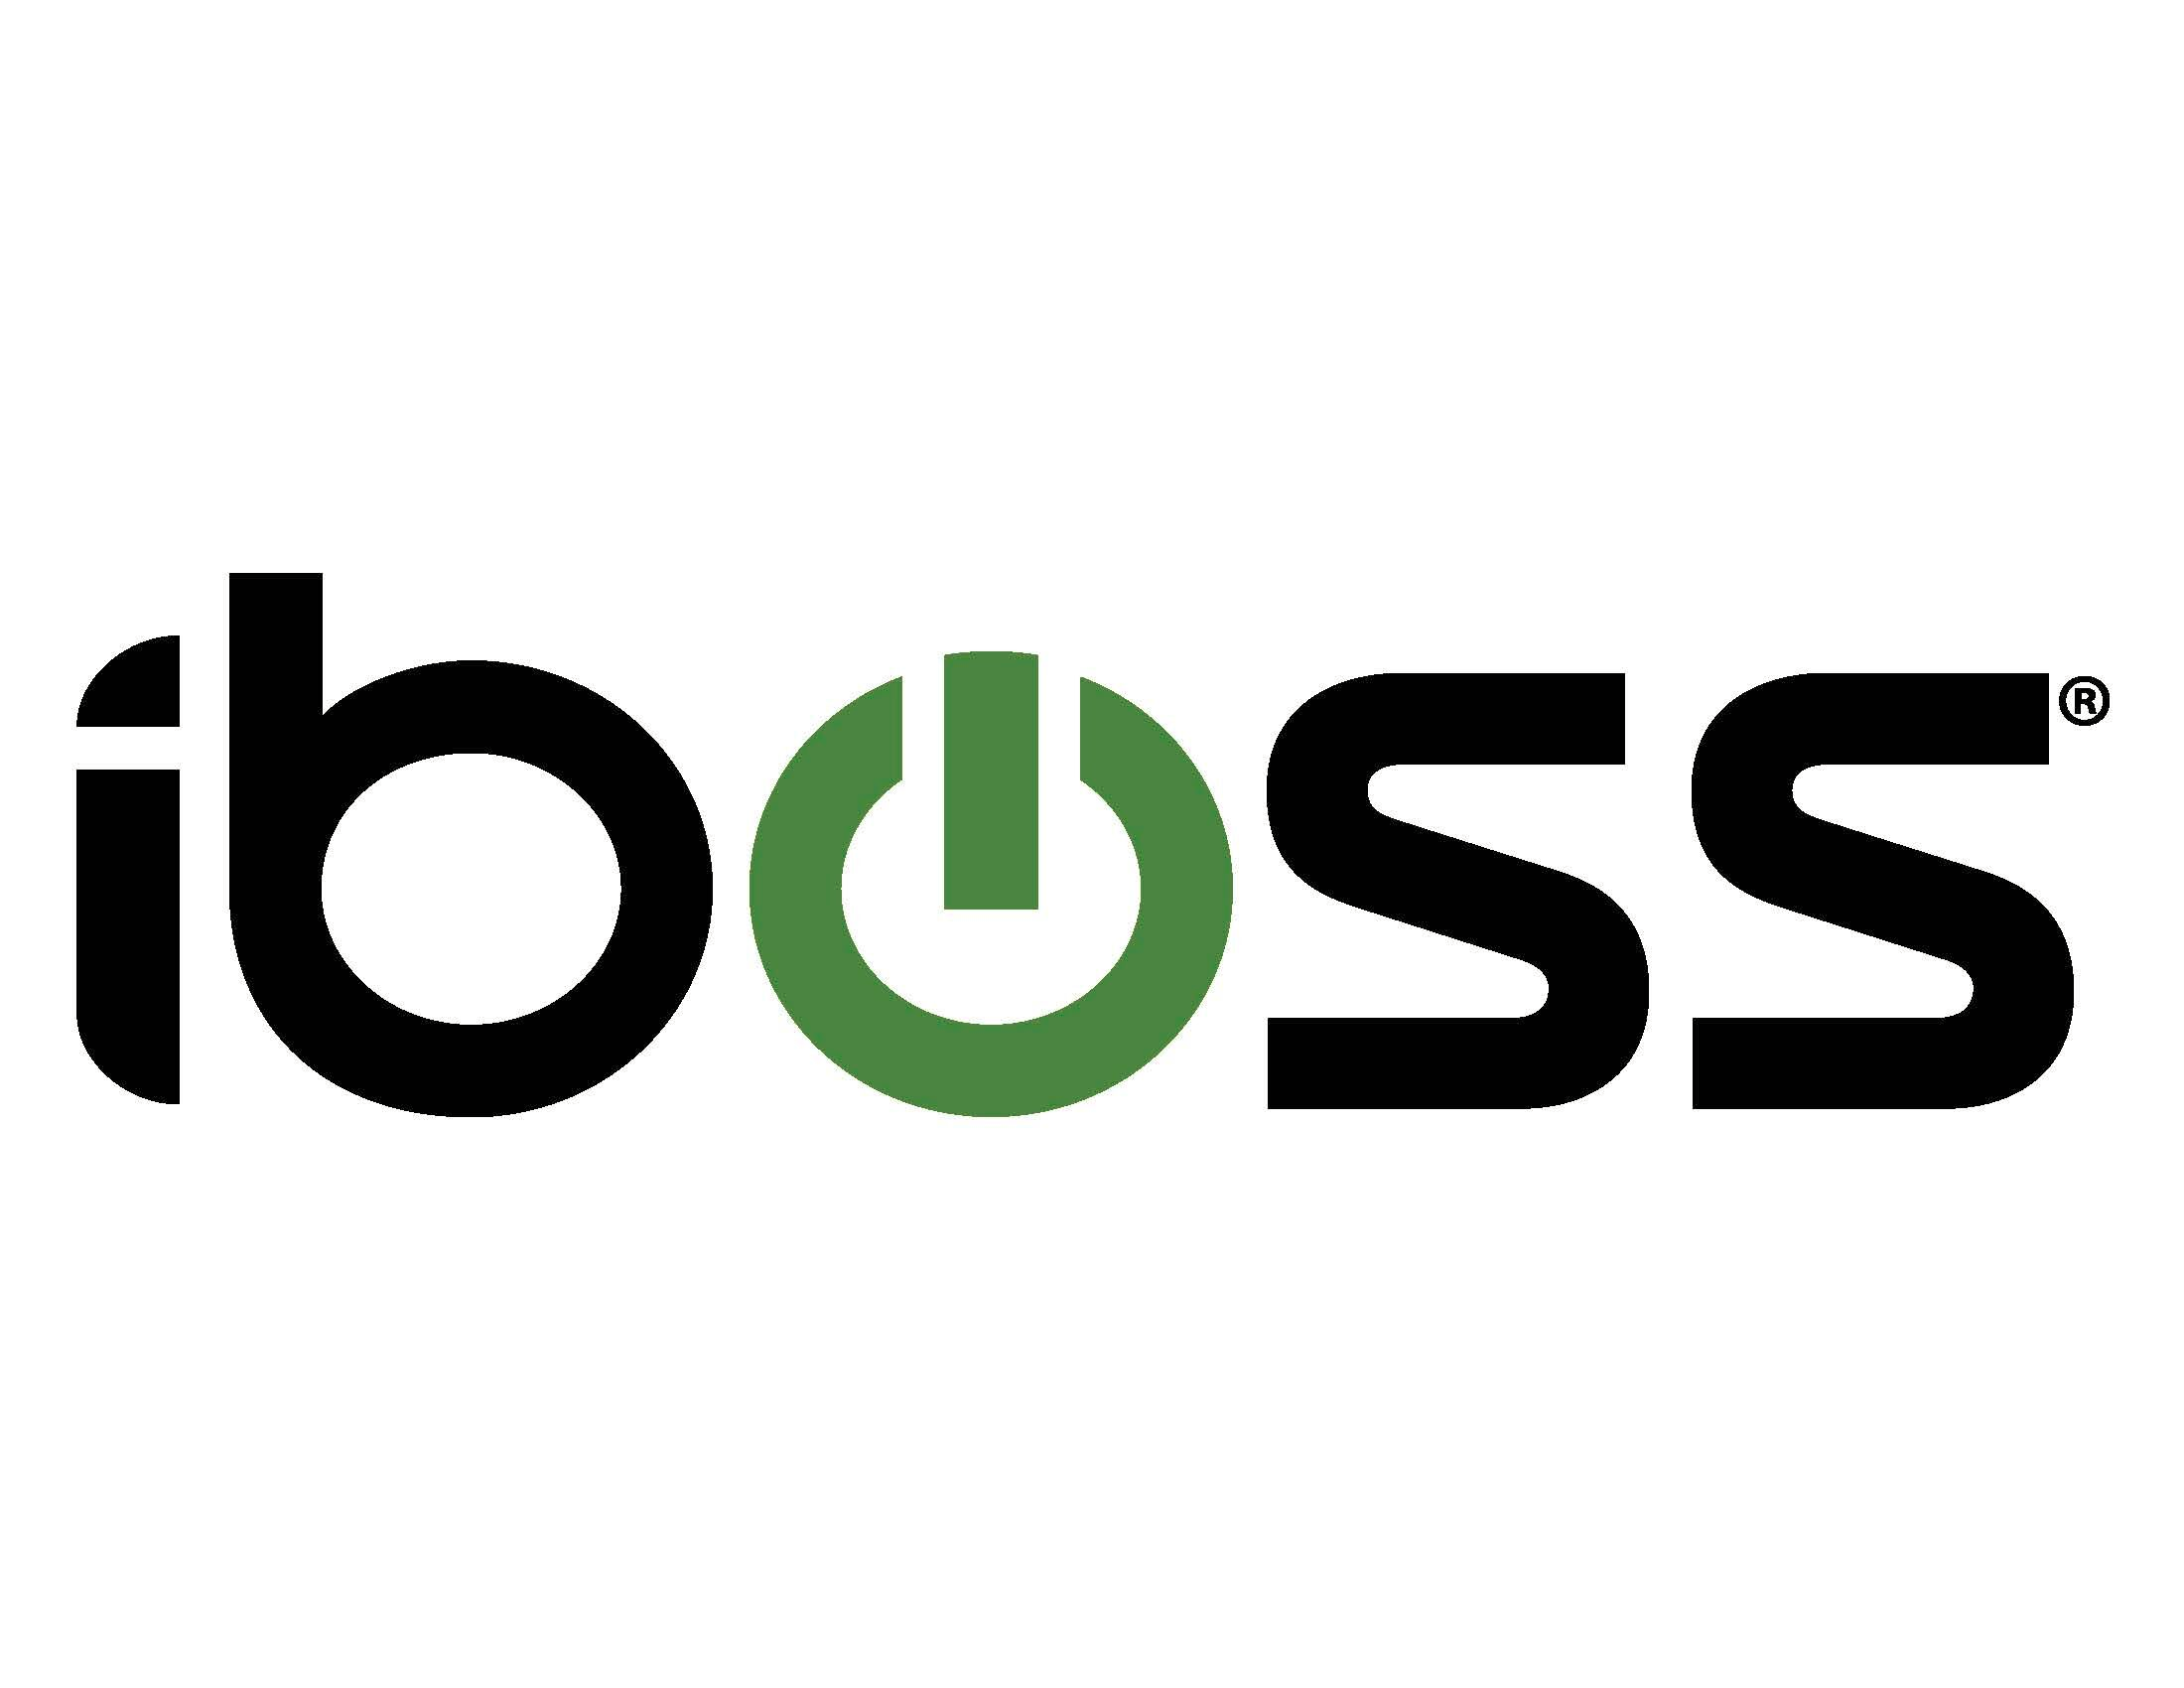 iboss, Monday, July 15, 2019, Press release picture